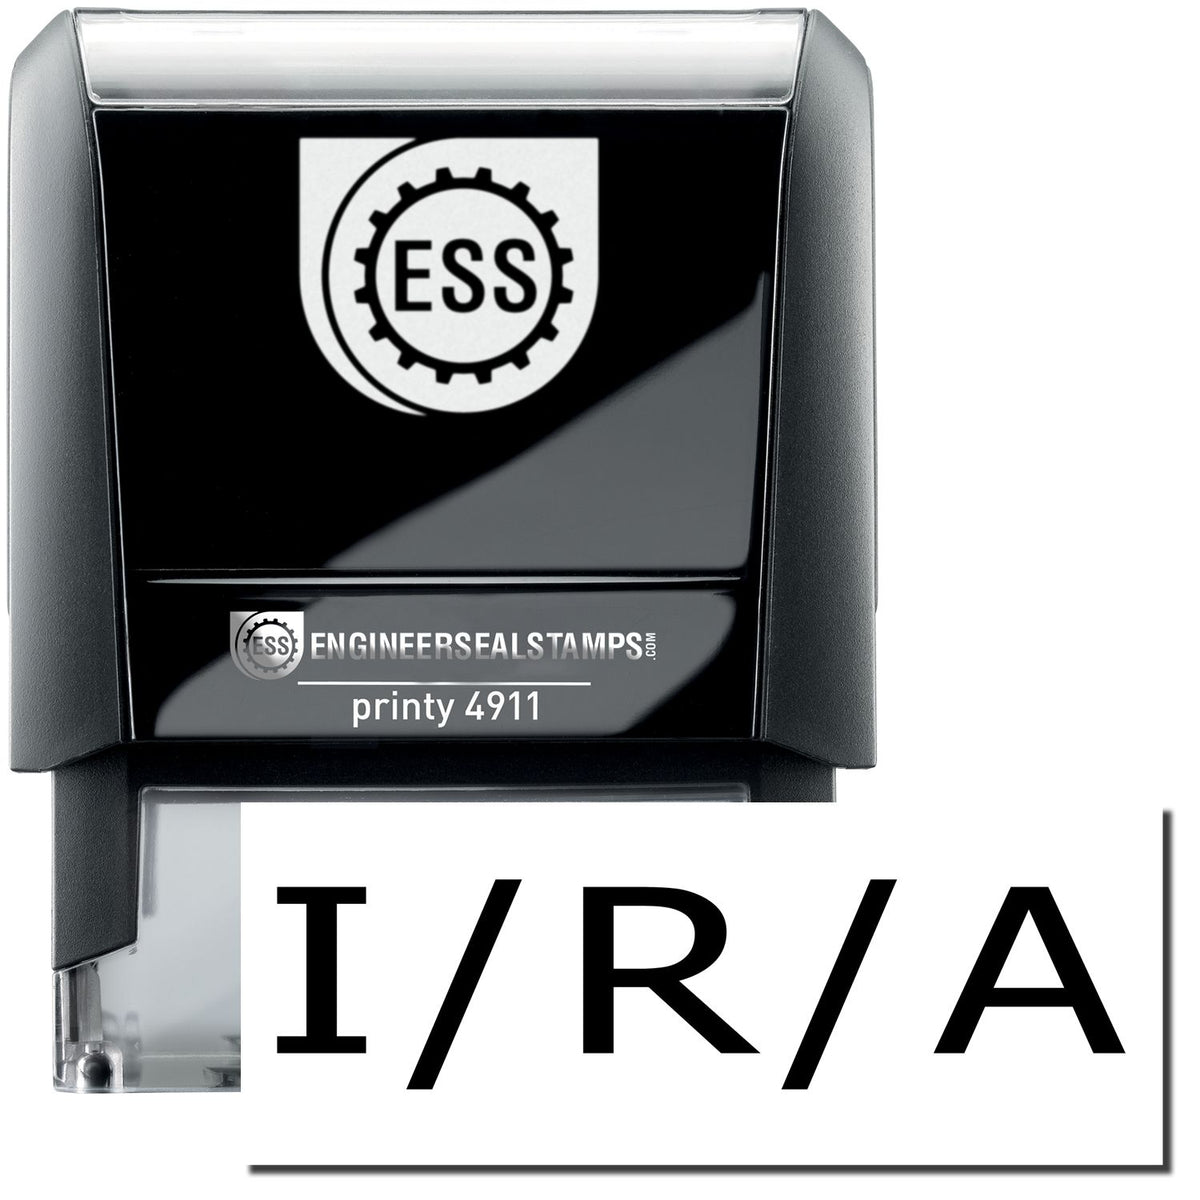 A self-inking stamp with a stamped image showing how the text &quot;I / R / A&quot; is displayed after stamping.